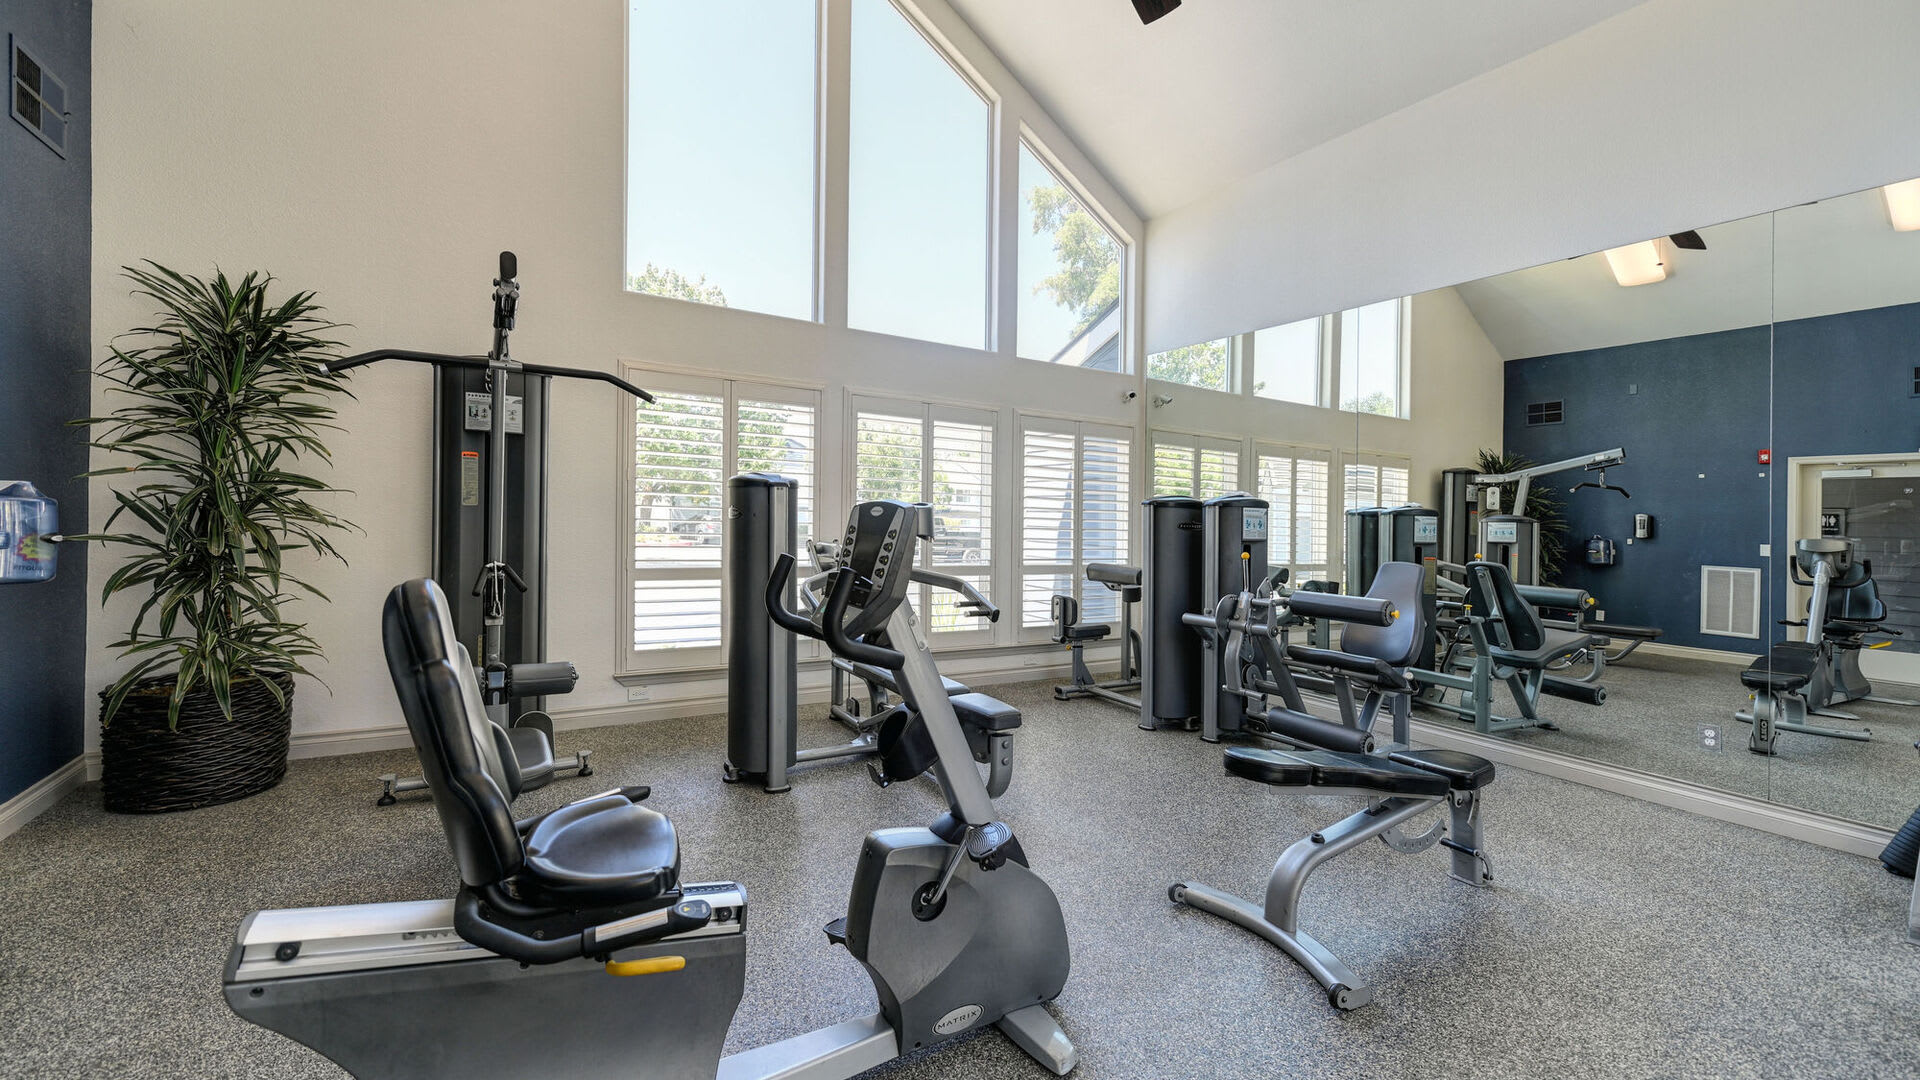 Fitness center at Lake Pointe Apartments in Folsom, California